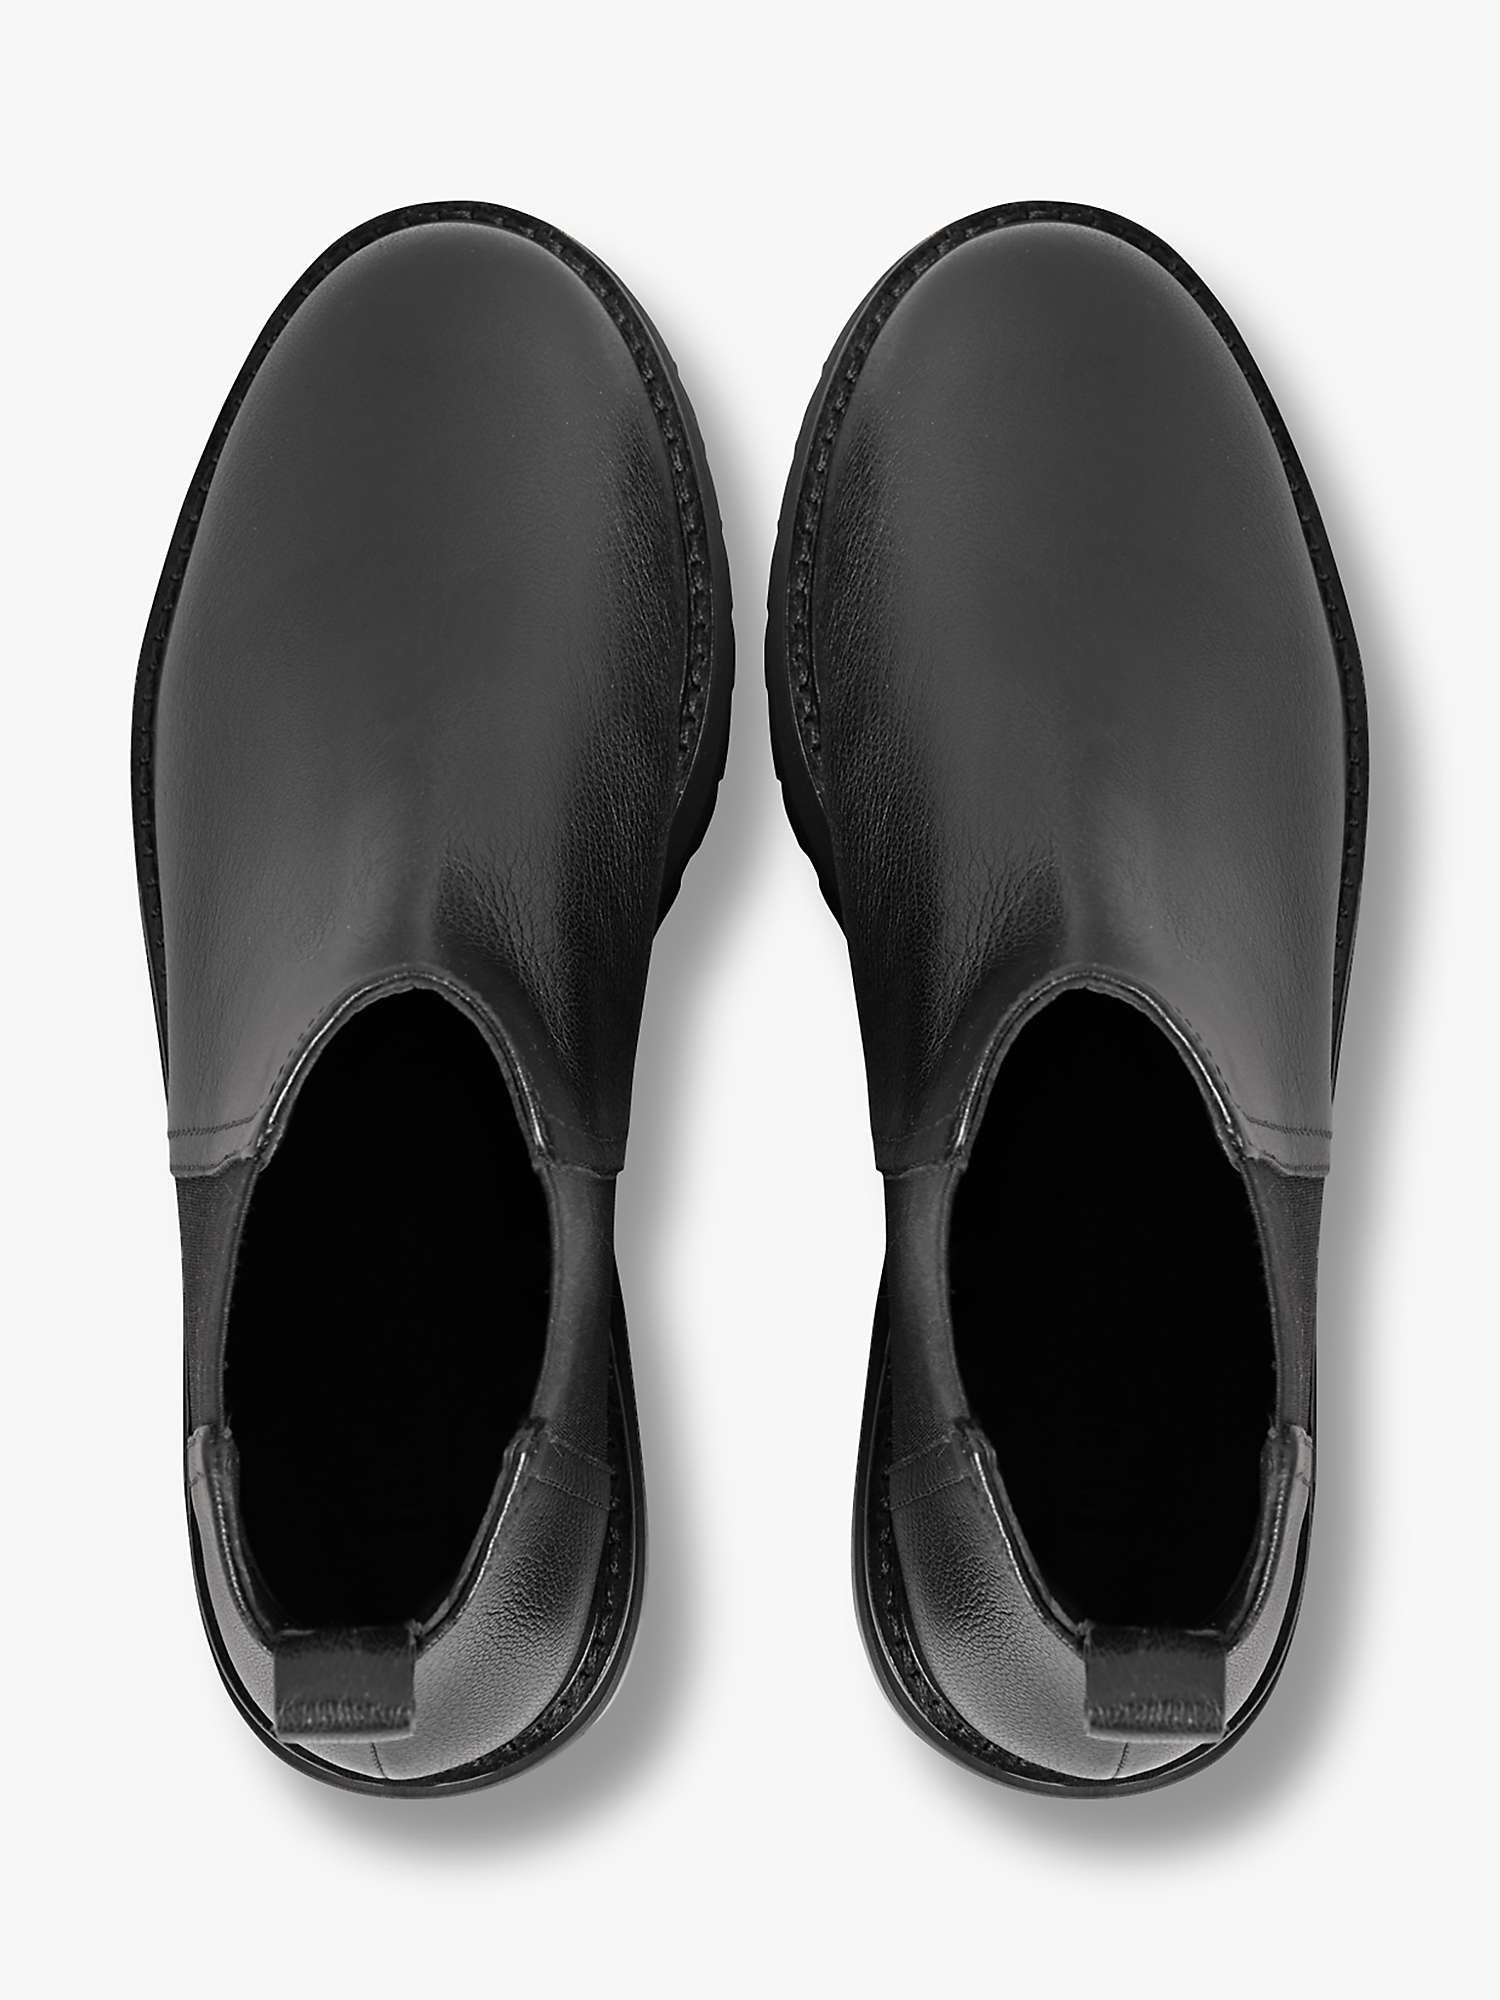 HUSH Bailey Leather Boots, Black at John Lewis & Partners